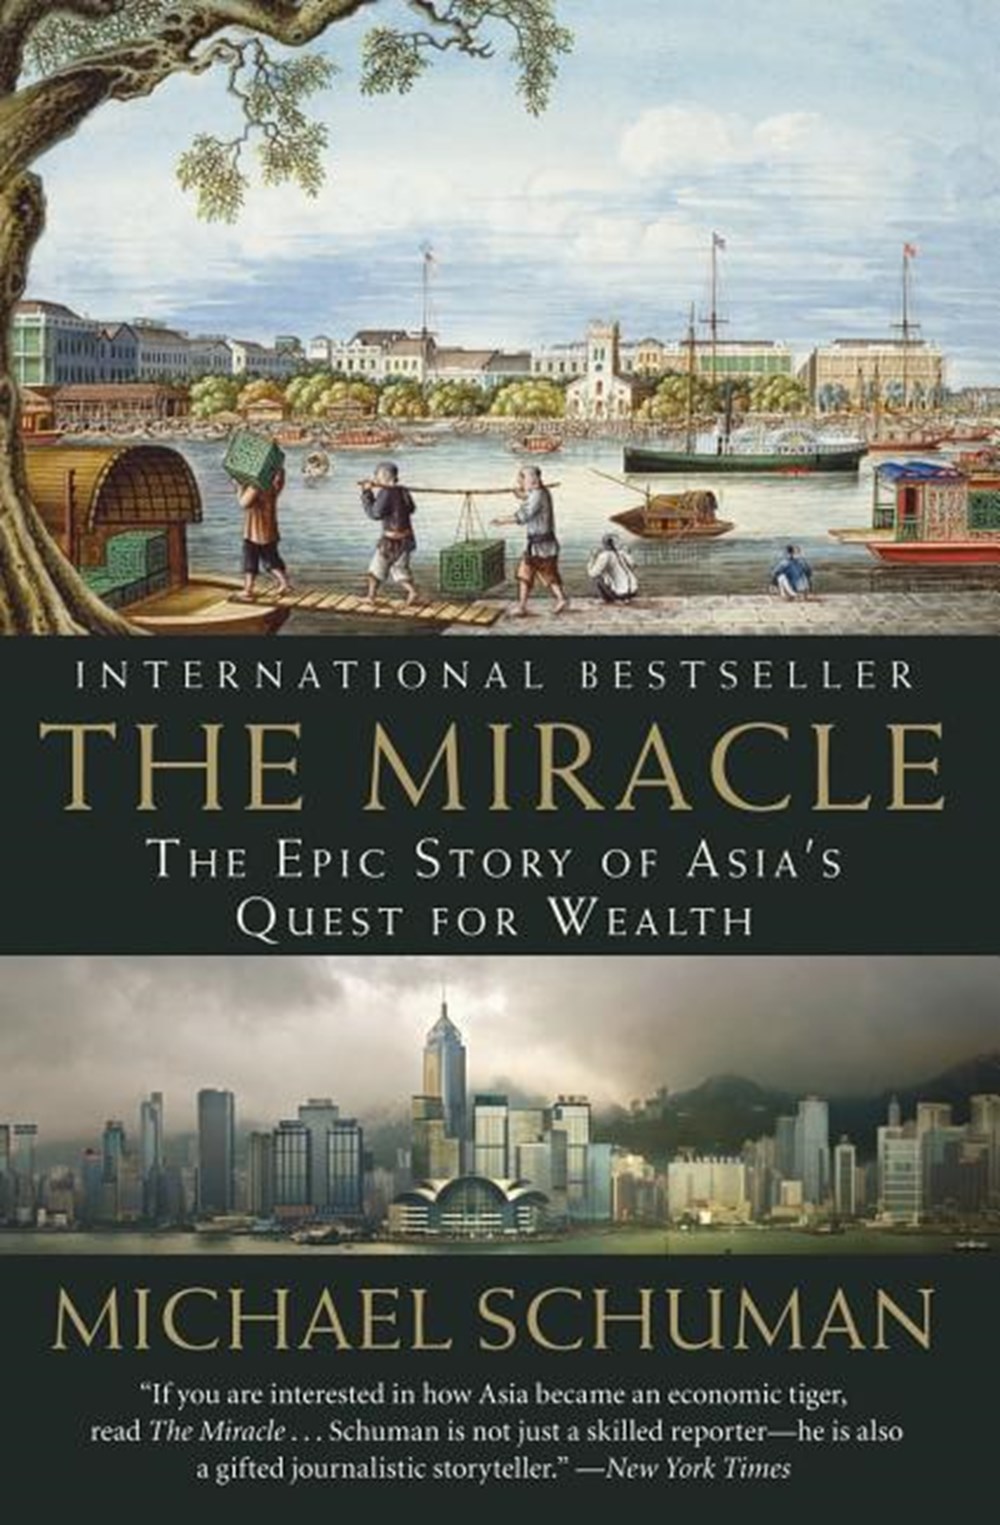 Miracle The Epic Story of Asia's Quest for Wealth